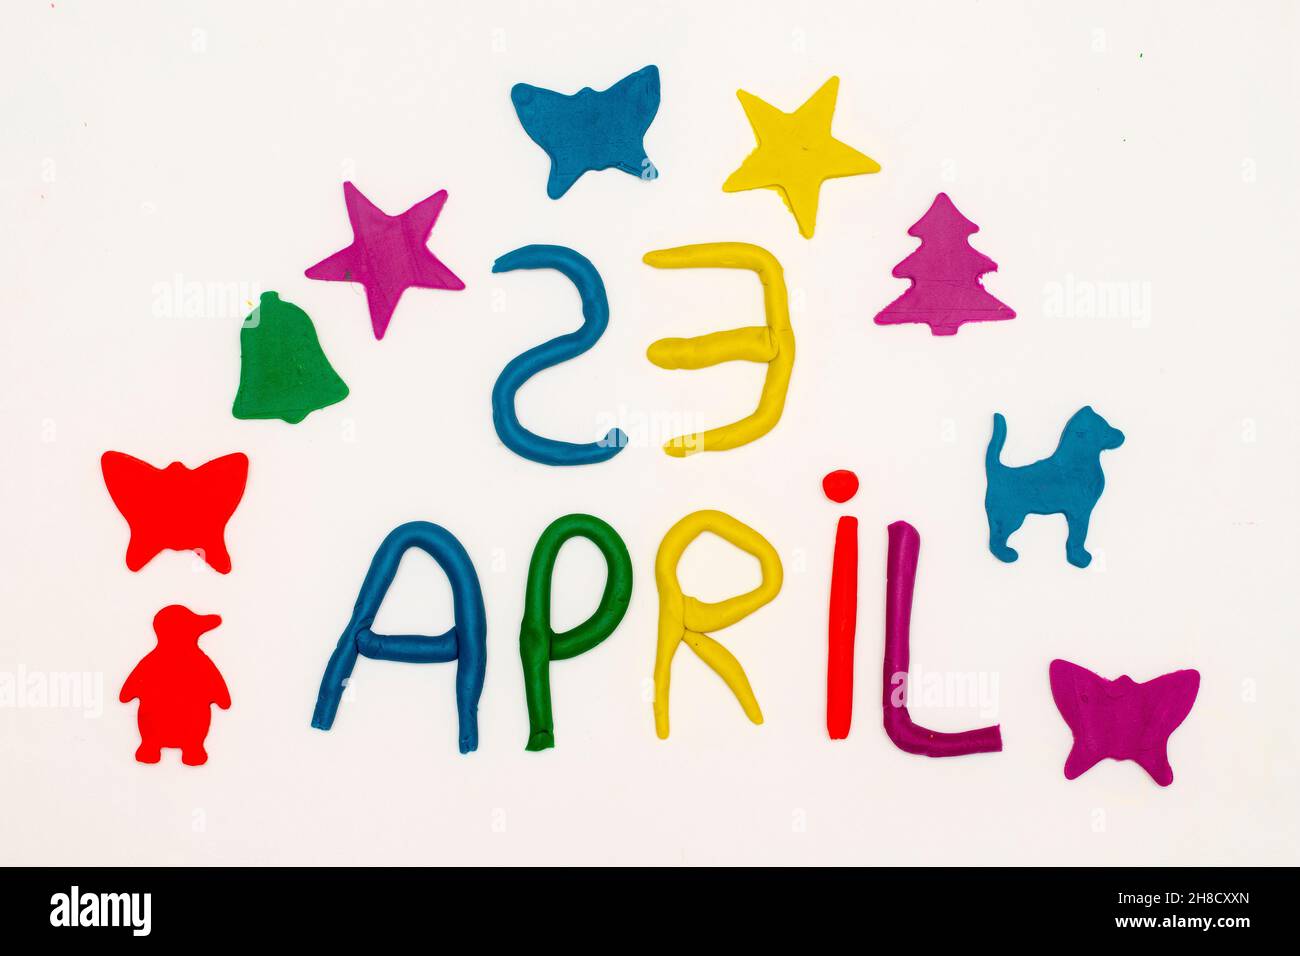 23 April inscription and figures written with dough on a white background. 23 april world children's day Stock Photo